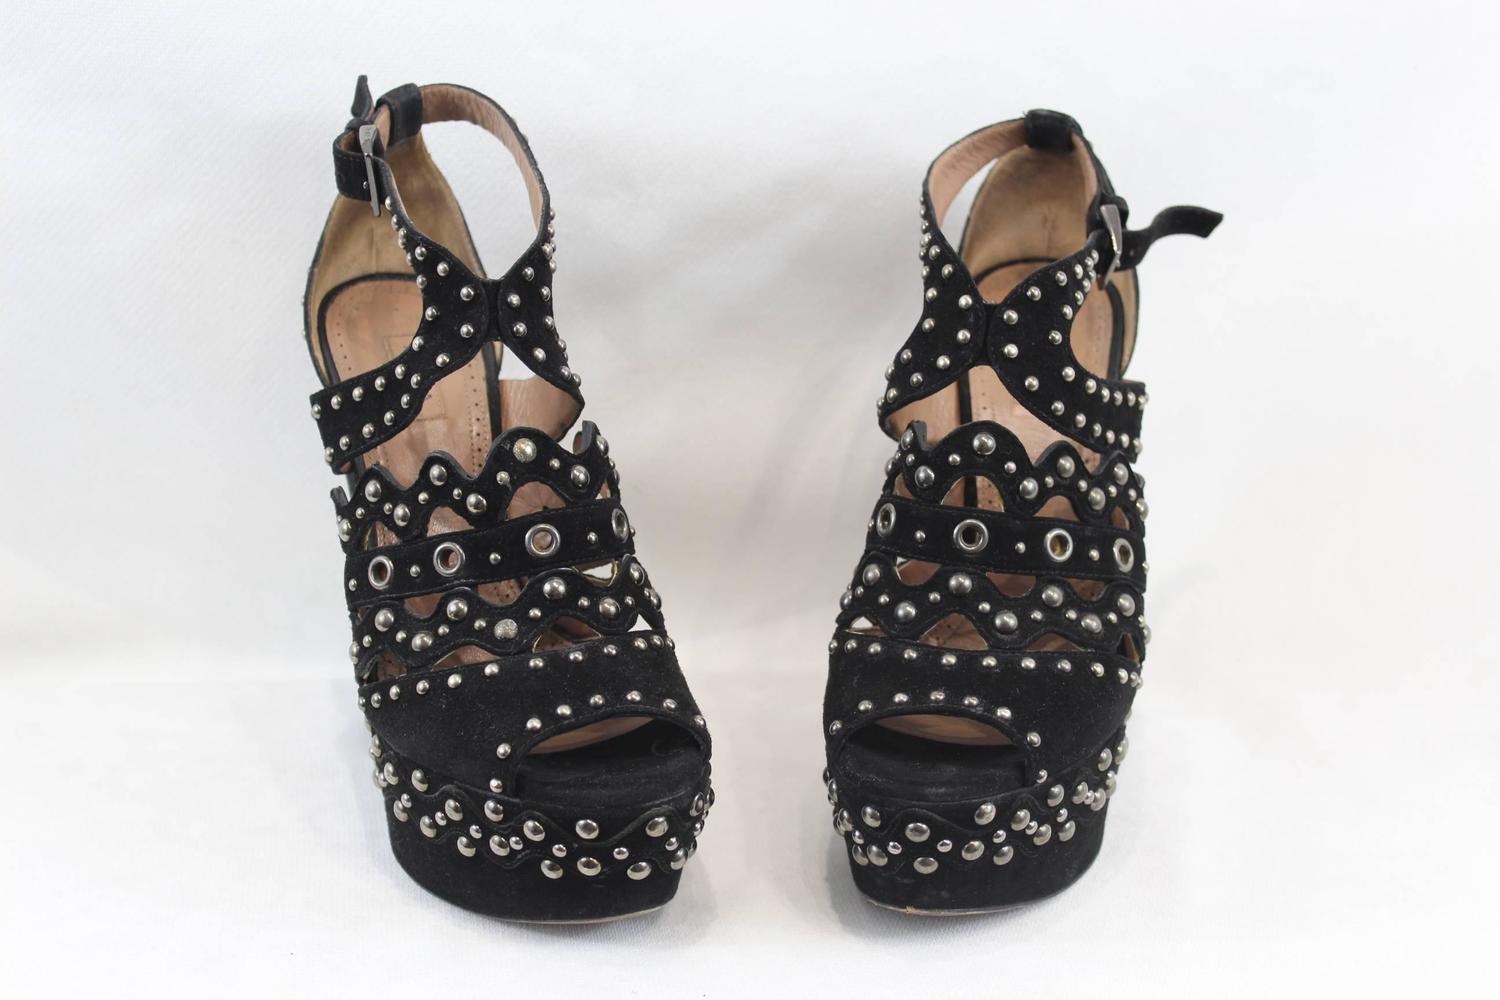 Azzedine Alaïa High Sandals in Black Suede. S. 36 For Sale at 1stdibs